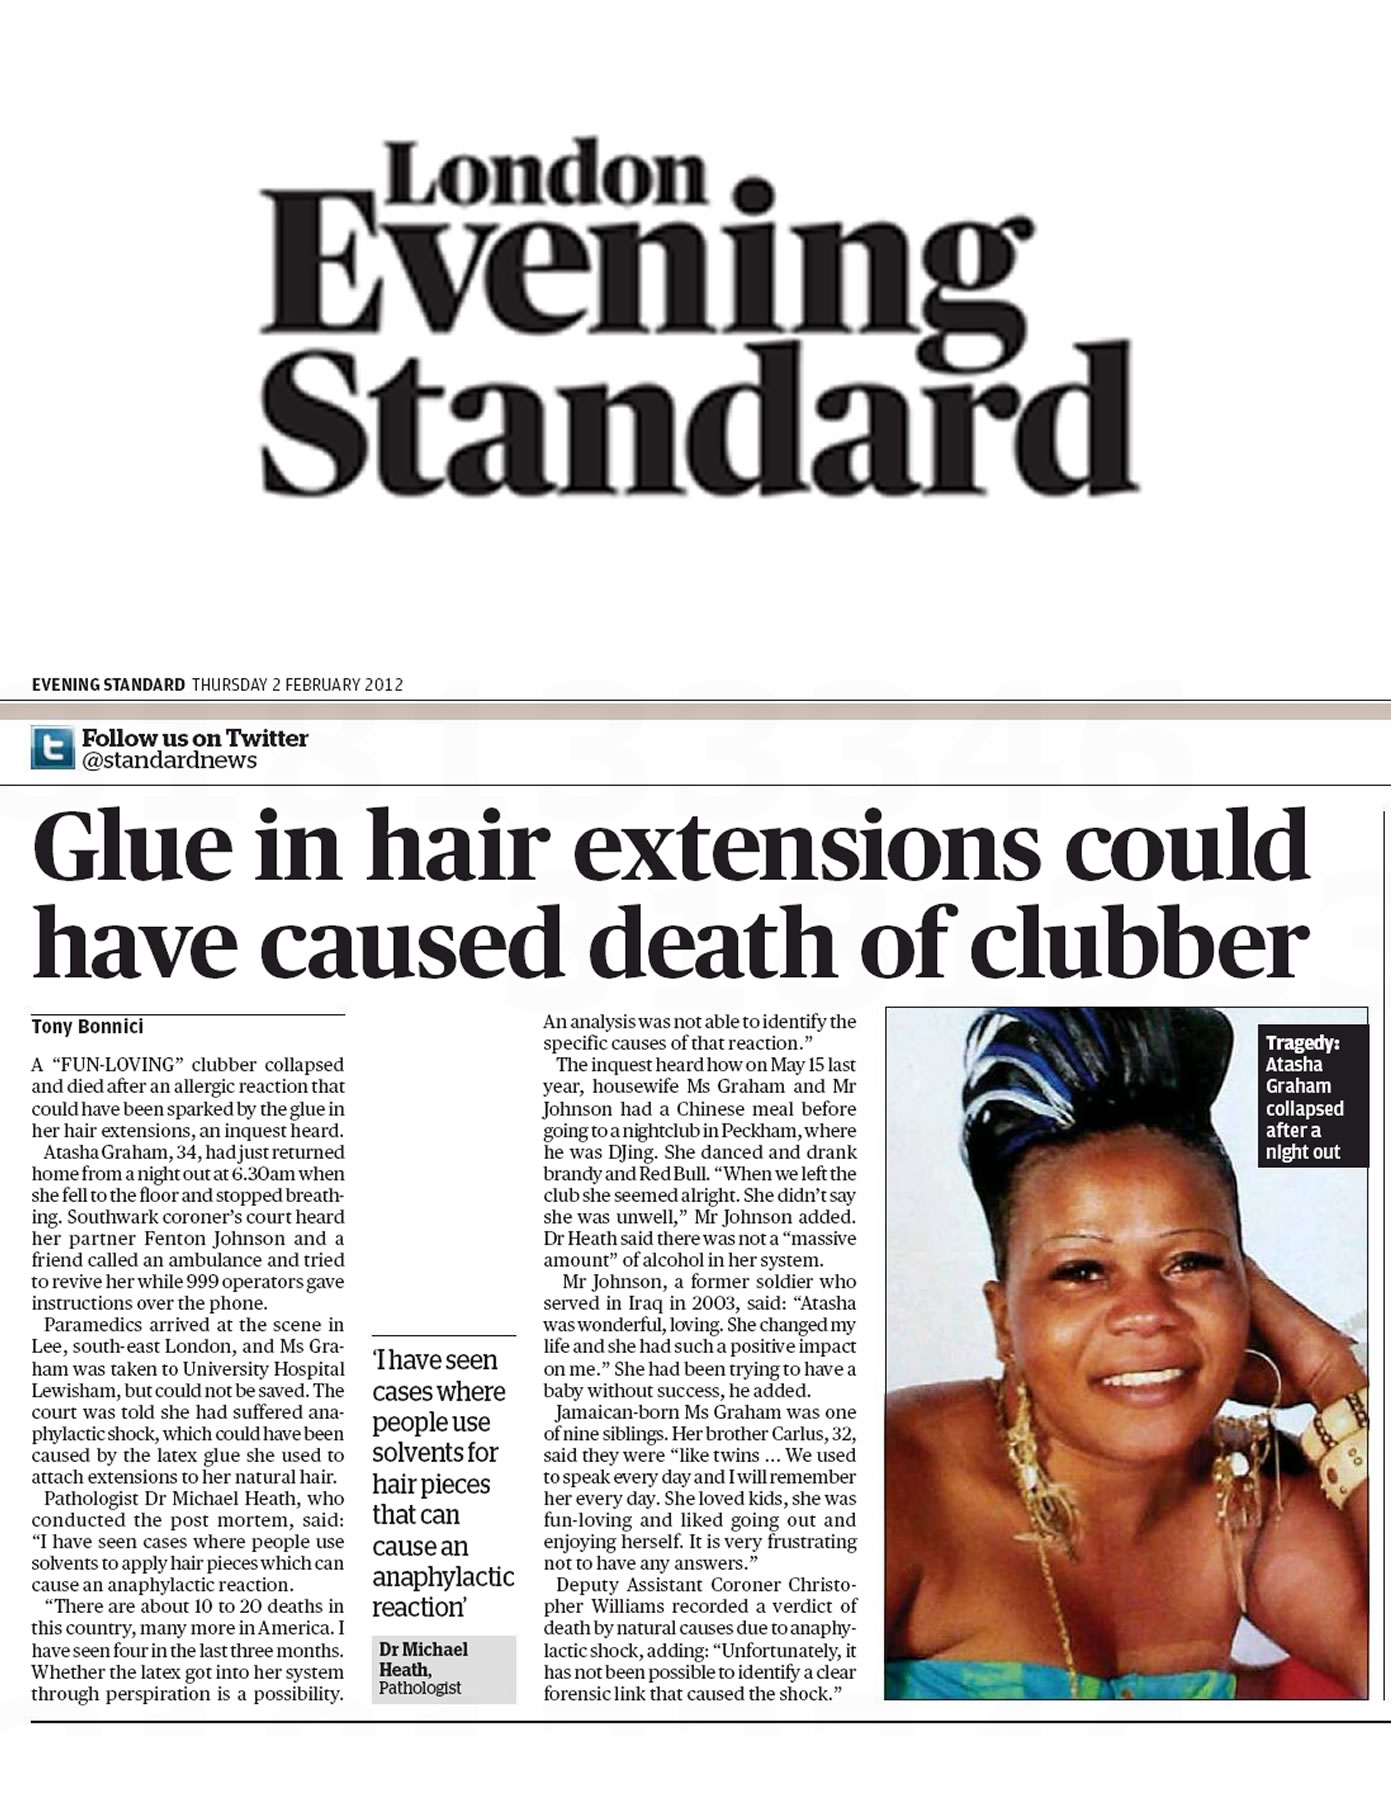 'Glue in hair extensions could have caused death of clubber' - Evening Standard, London